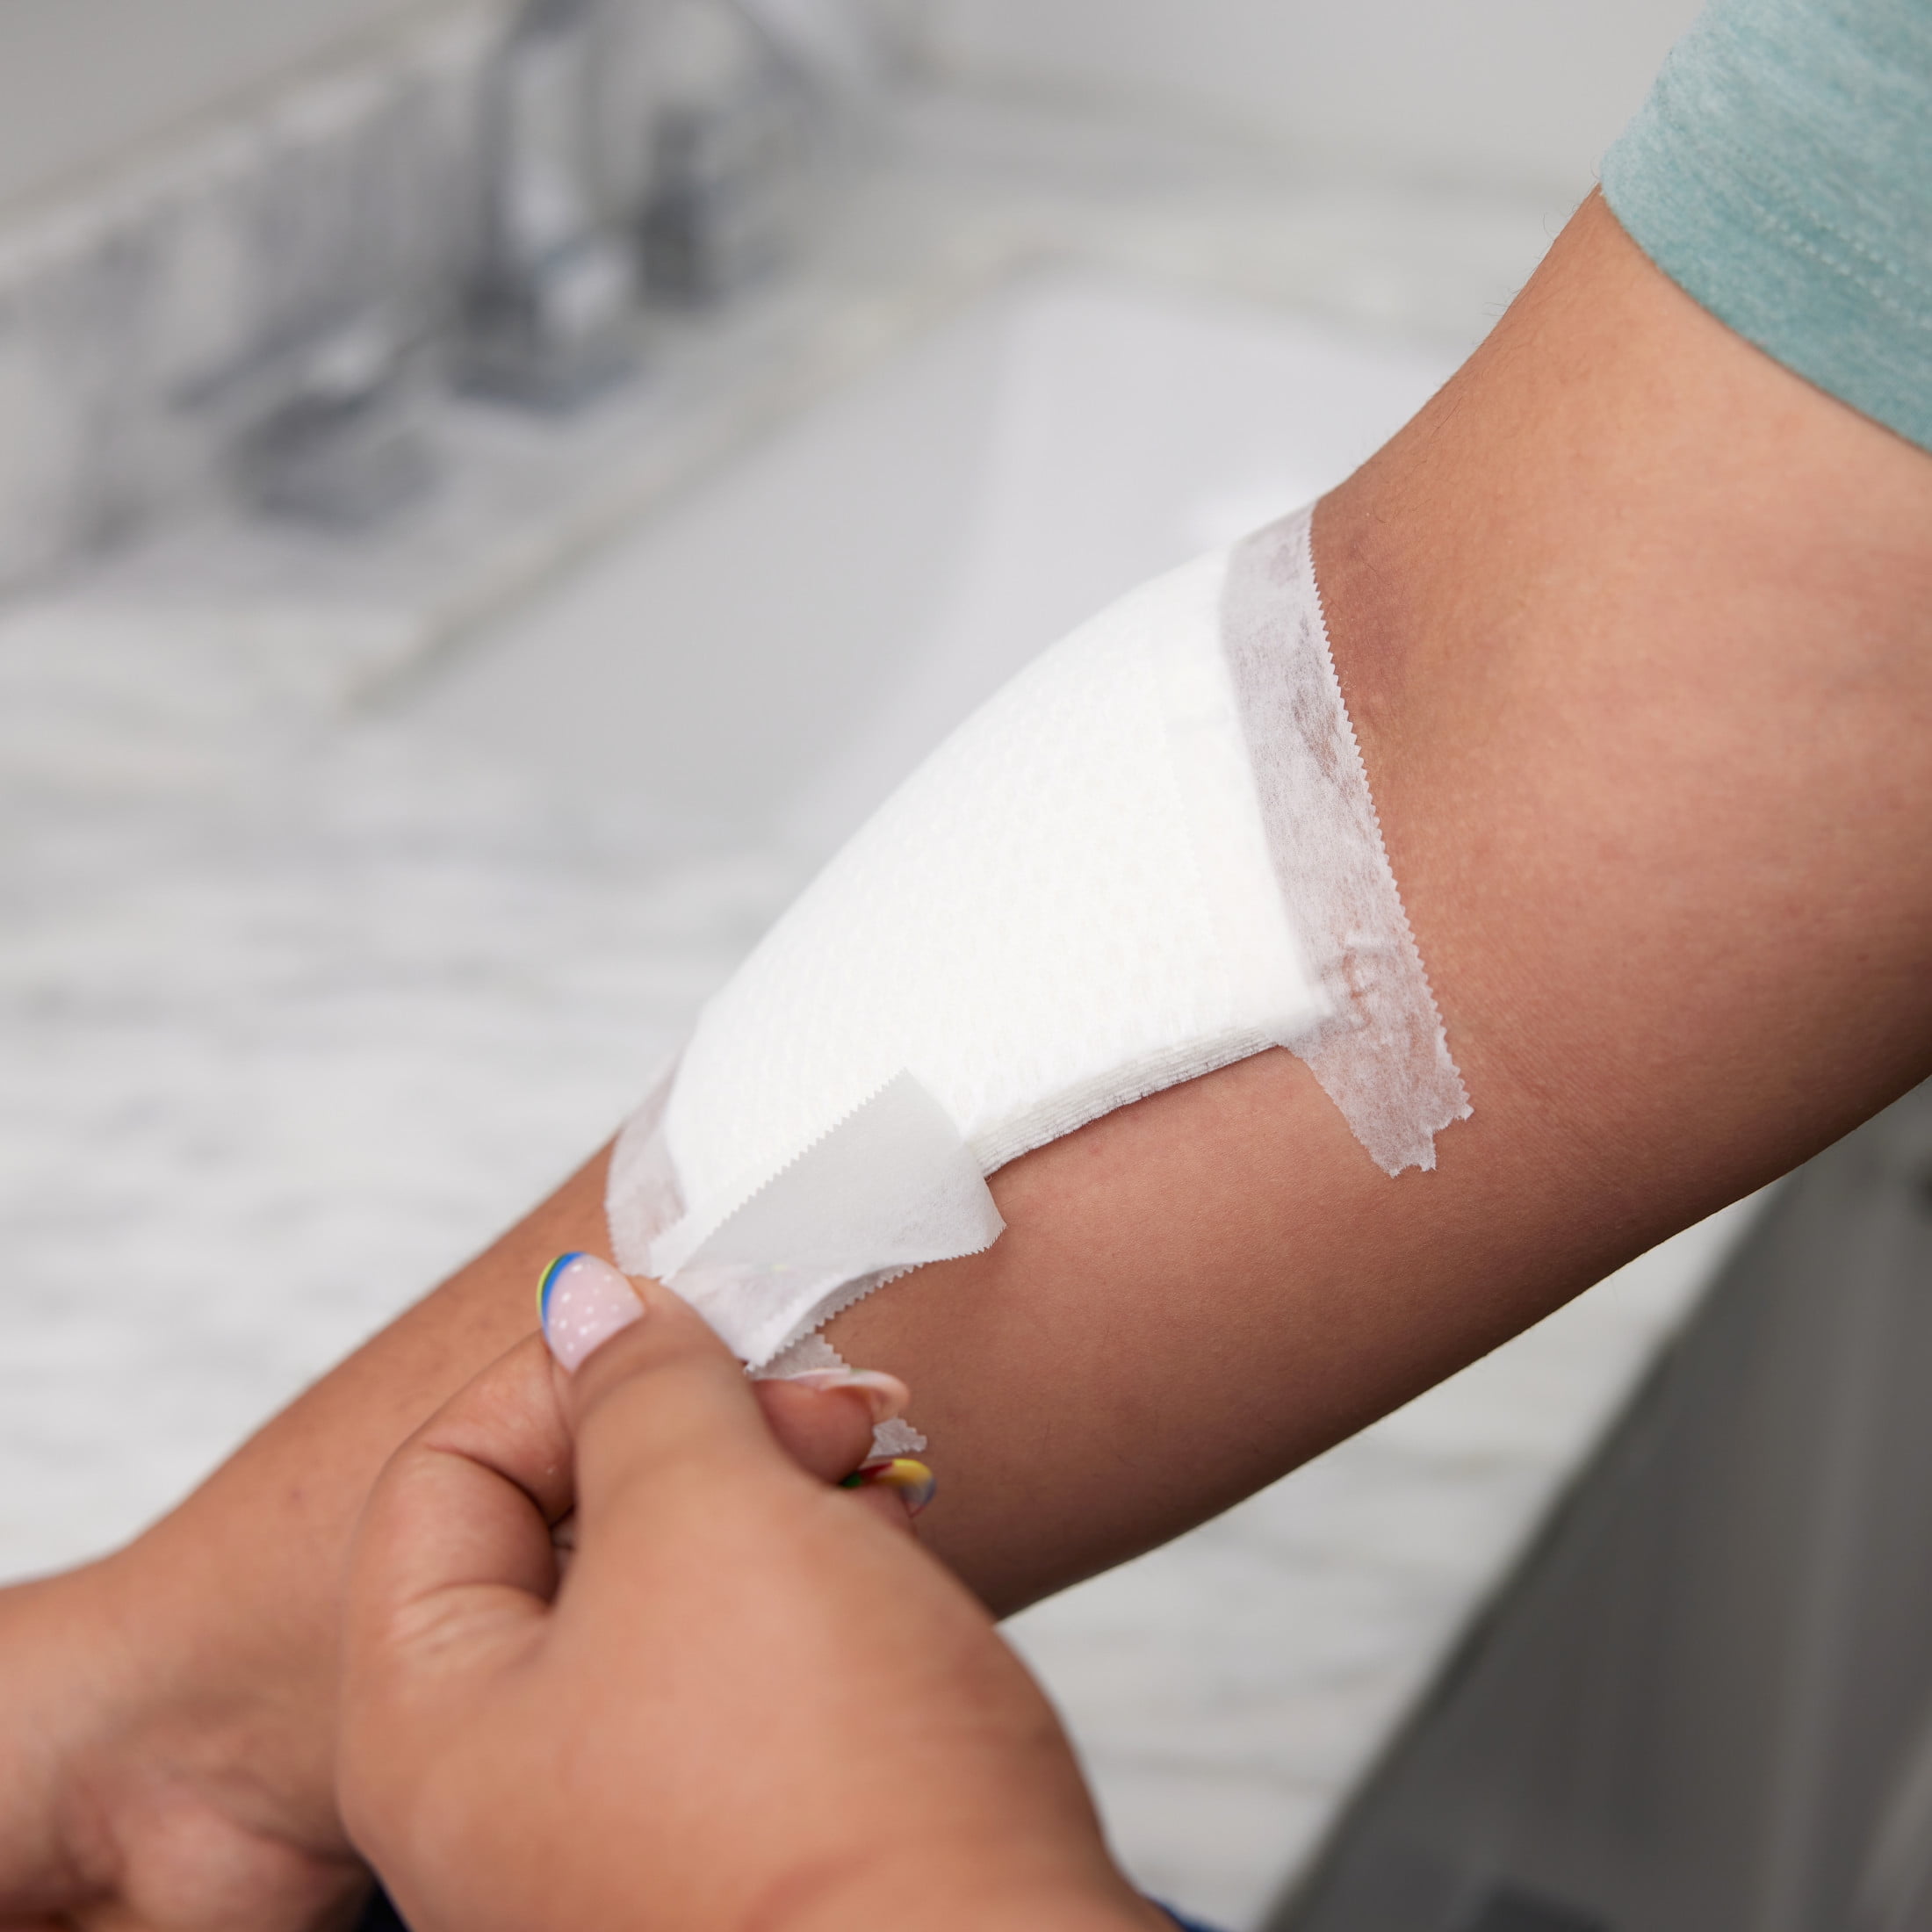 HURT-FREE® Medical Paper Tape for Securing Wound Dressing